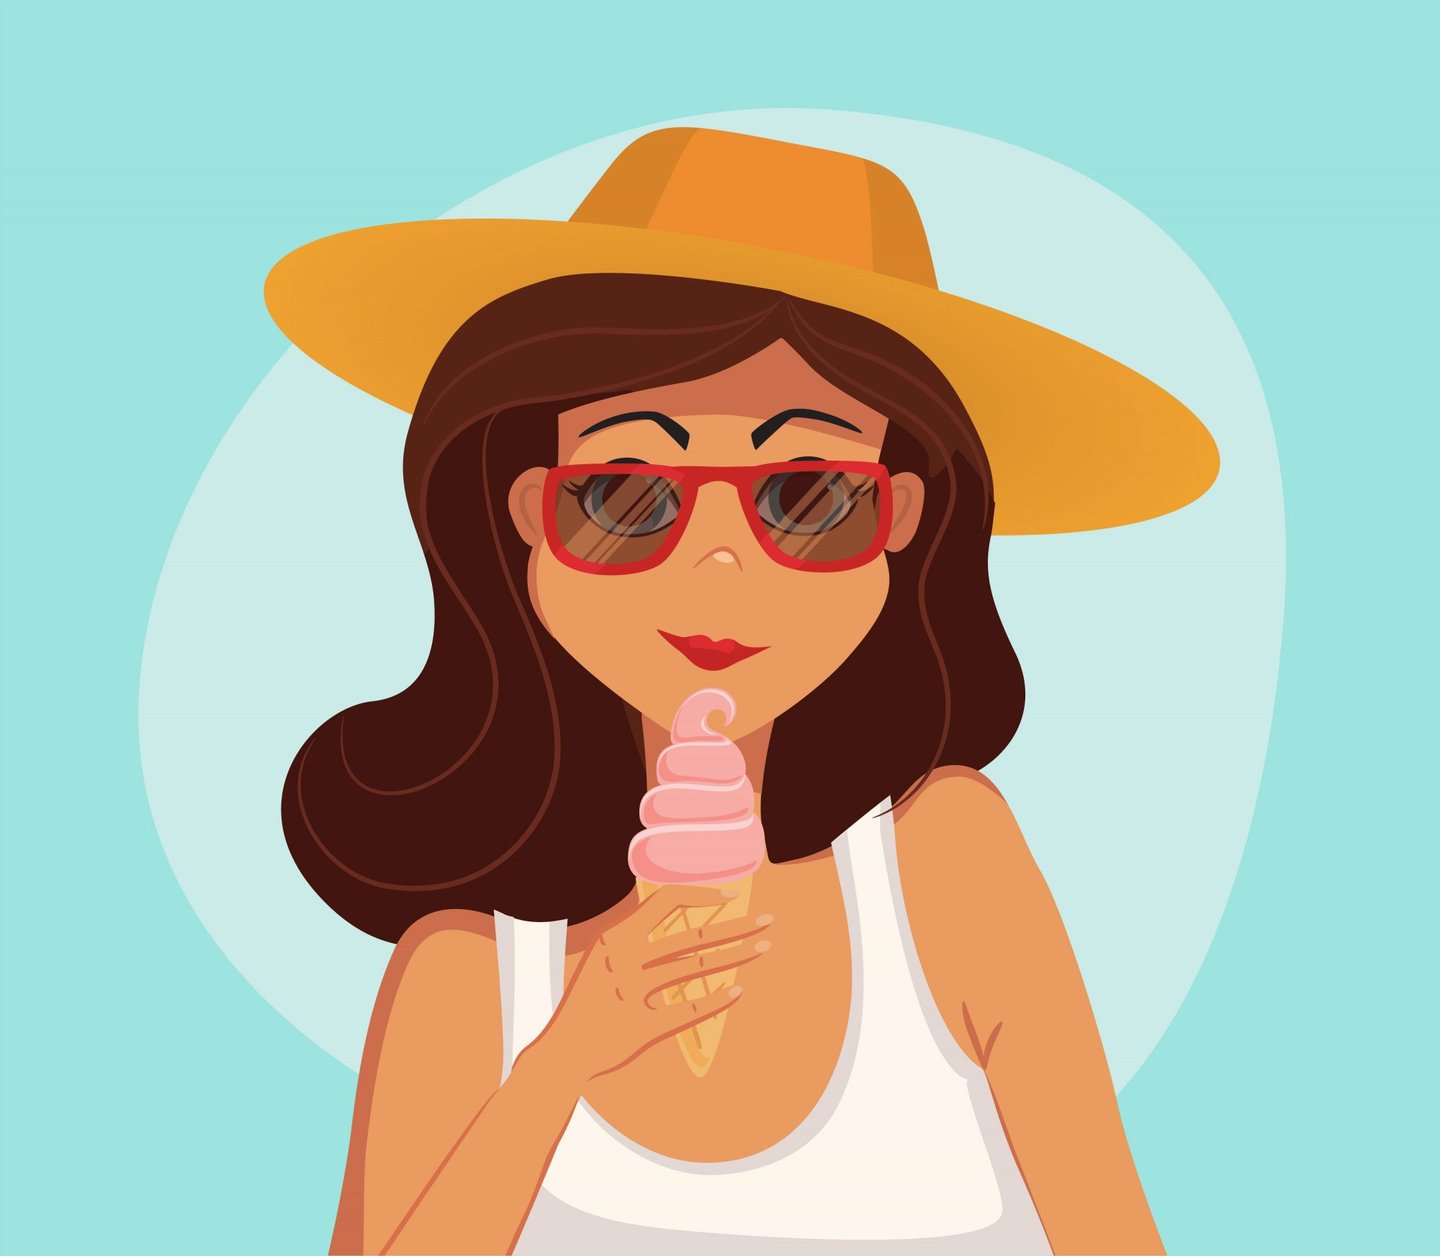 vector, food, frozen, snack, dessert, flavor, blue, flat, popsicles, summer, sweet, refreshment, treat, frosty, icecream, retro, gelato, cone, yogurt, milky, yummy, cartoon, delicious, girl, sunglasses, hat, travel, holiday, character, pen, female, fashion, eyes, smile, doodle, lady, rest, lifestyle, brush, up, beach, woman, close, trendy, beauty, sea, beautiful, pretty, big, zzzaadaaanhdhfgngngfhcfpghgjhcgmfpde, 